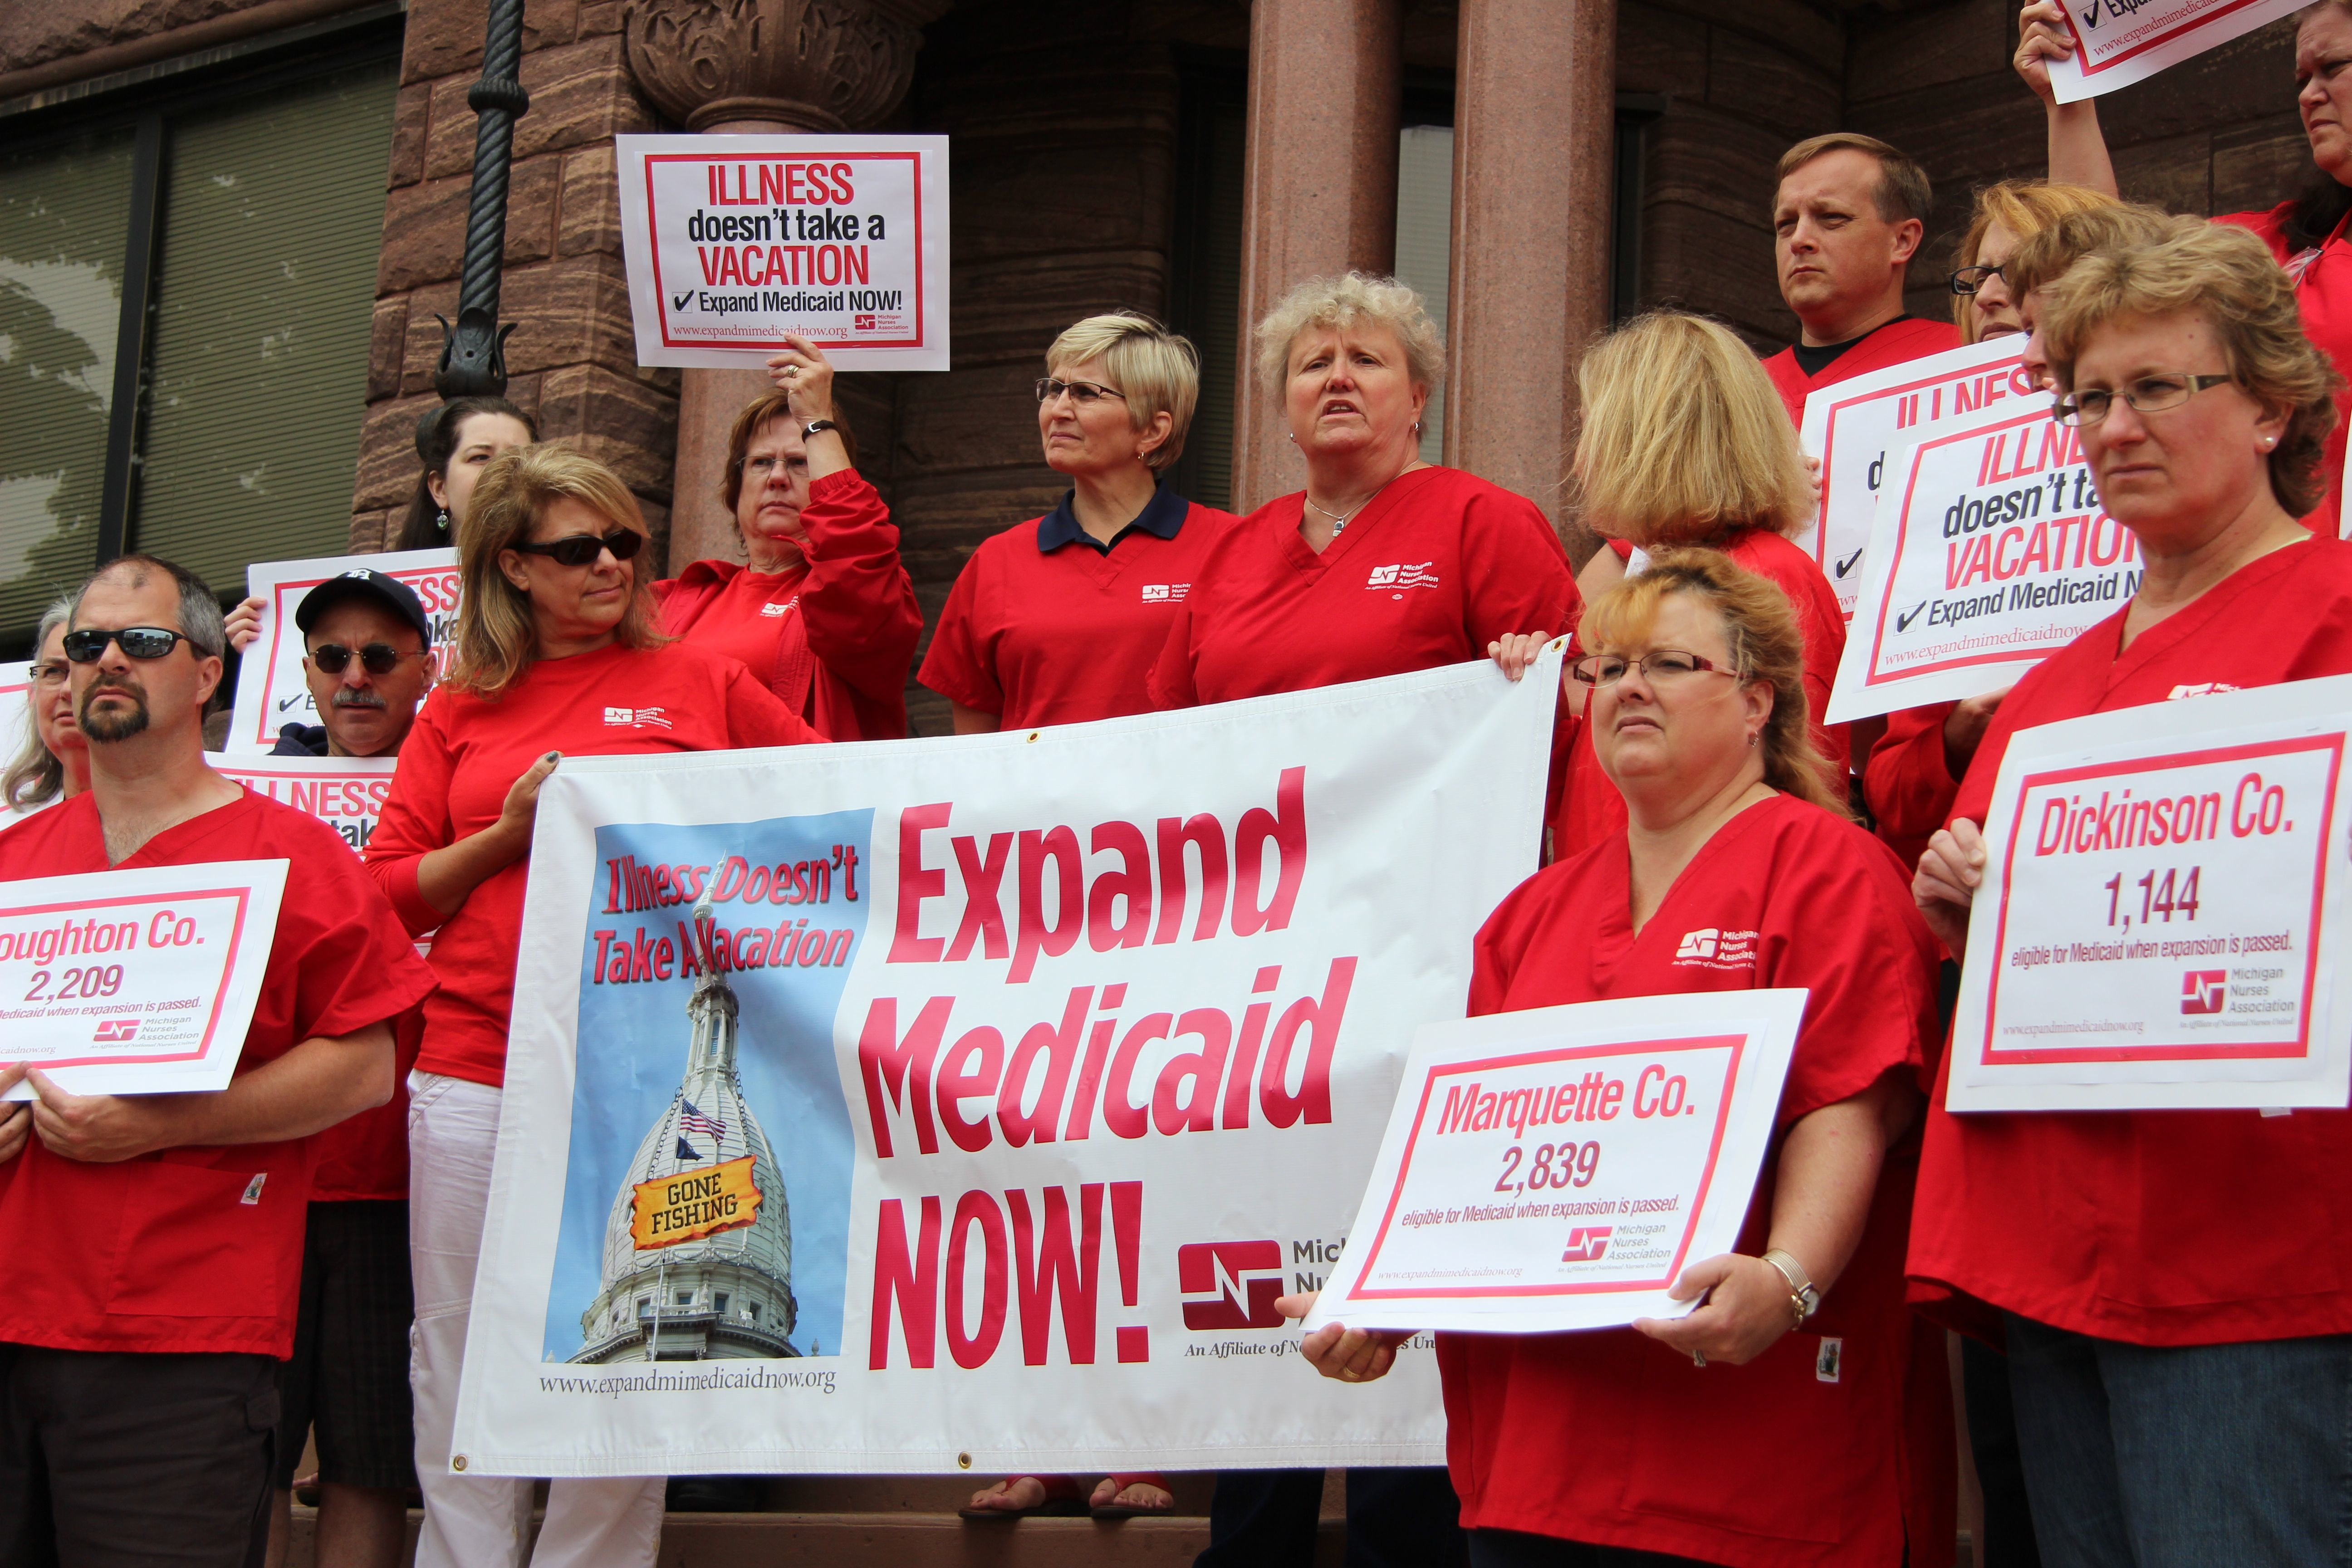 Nurses care, which is why they’re advocating for Michigan Medicaid expansion